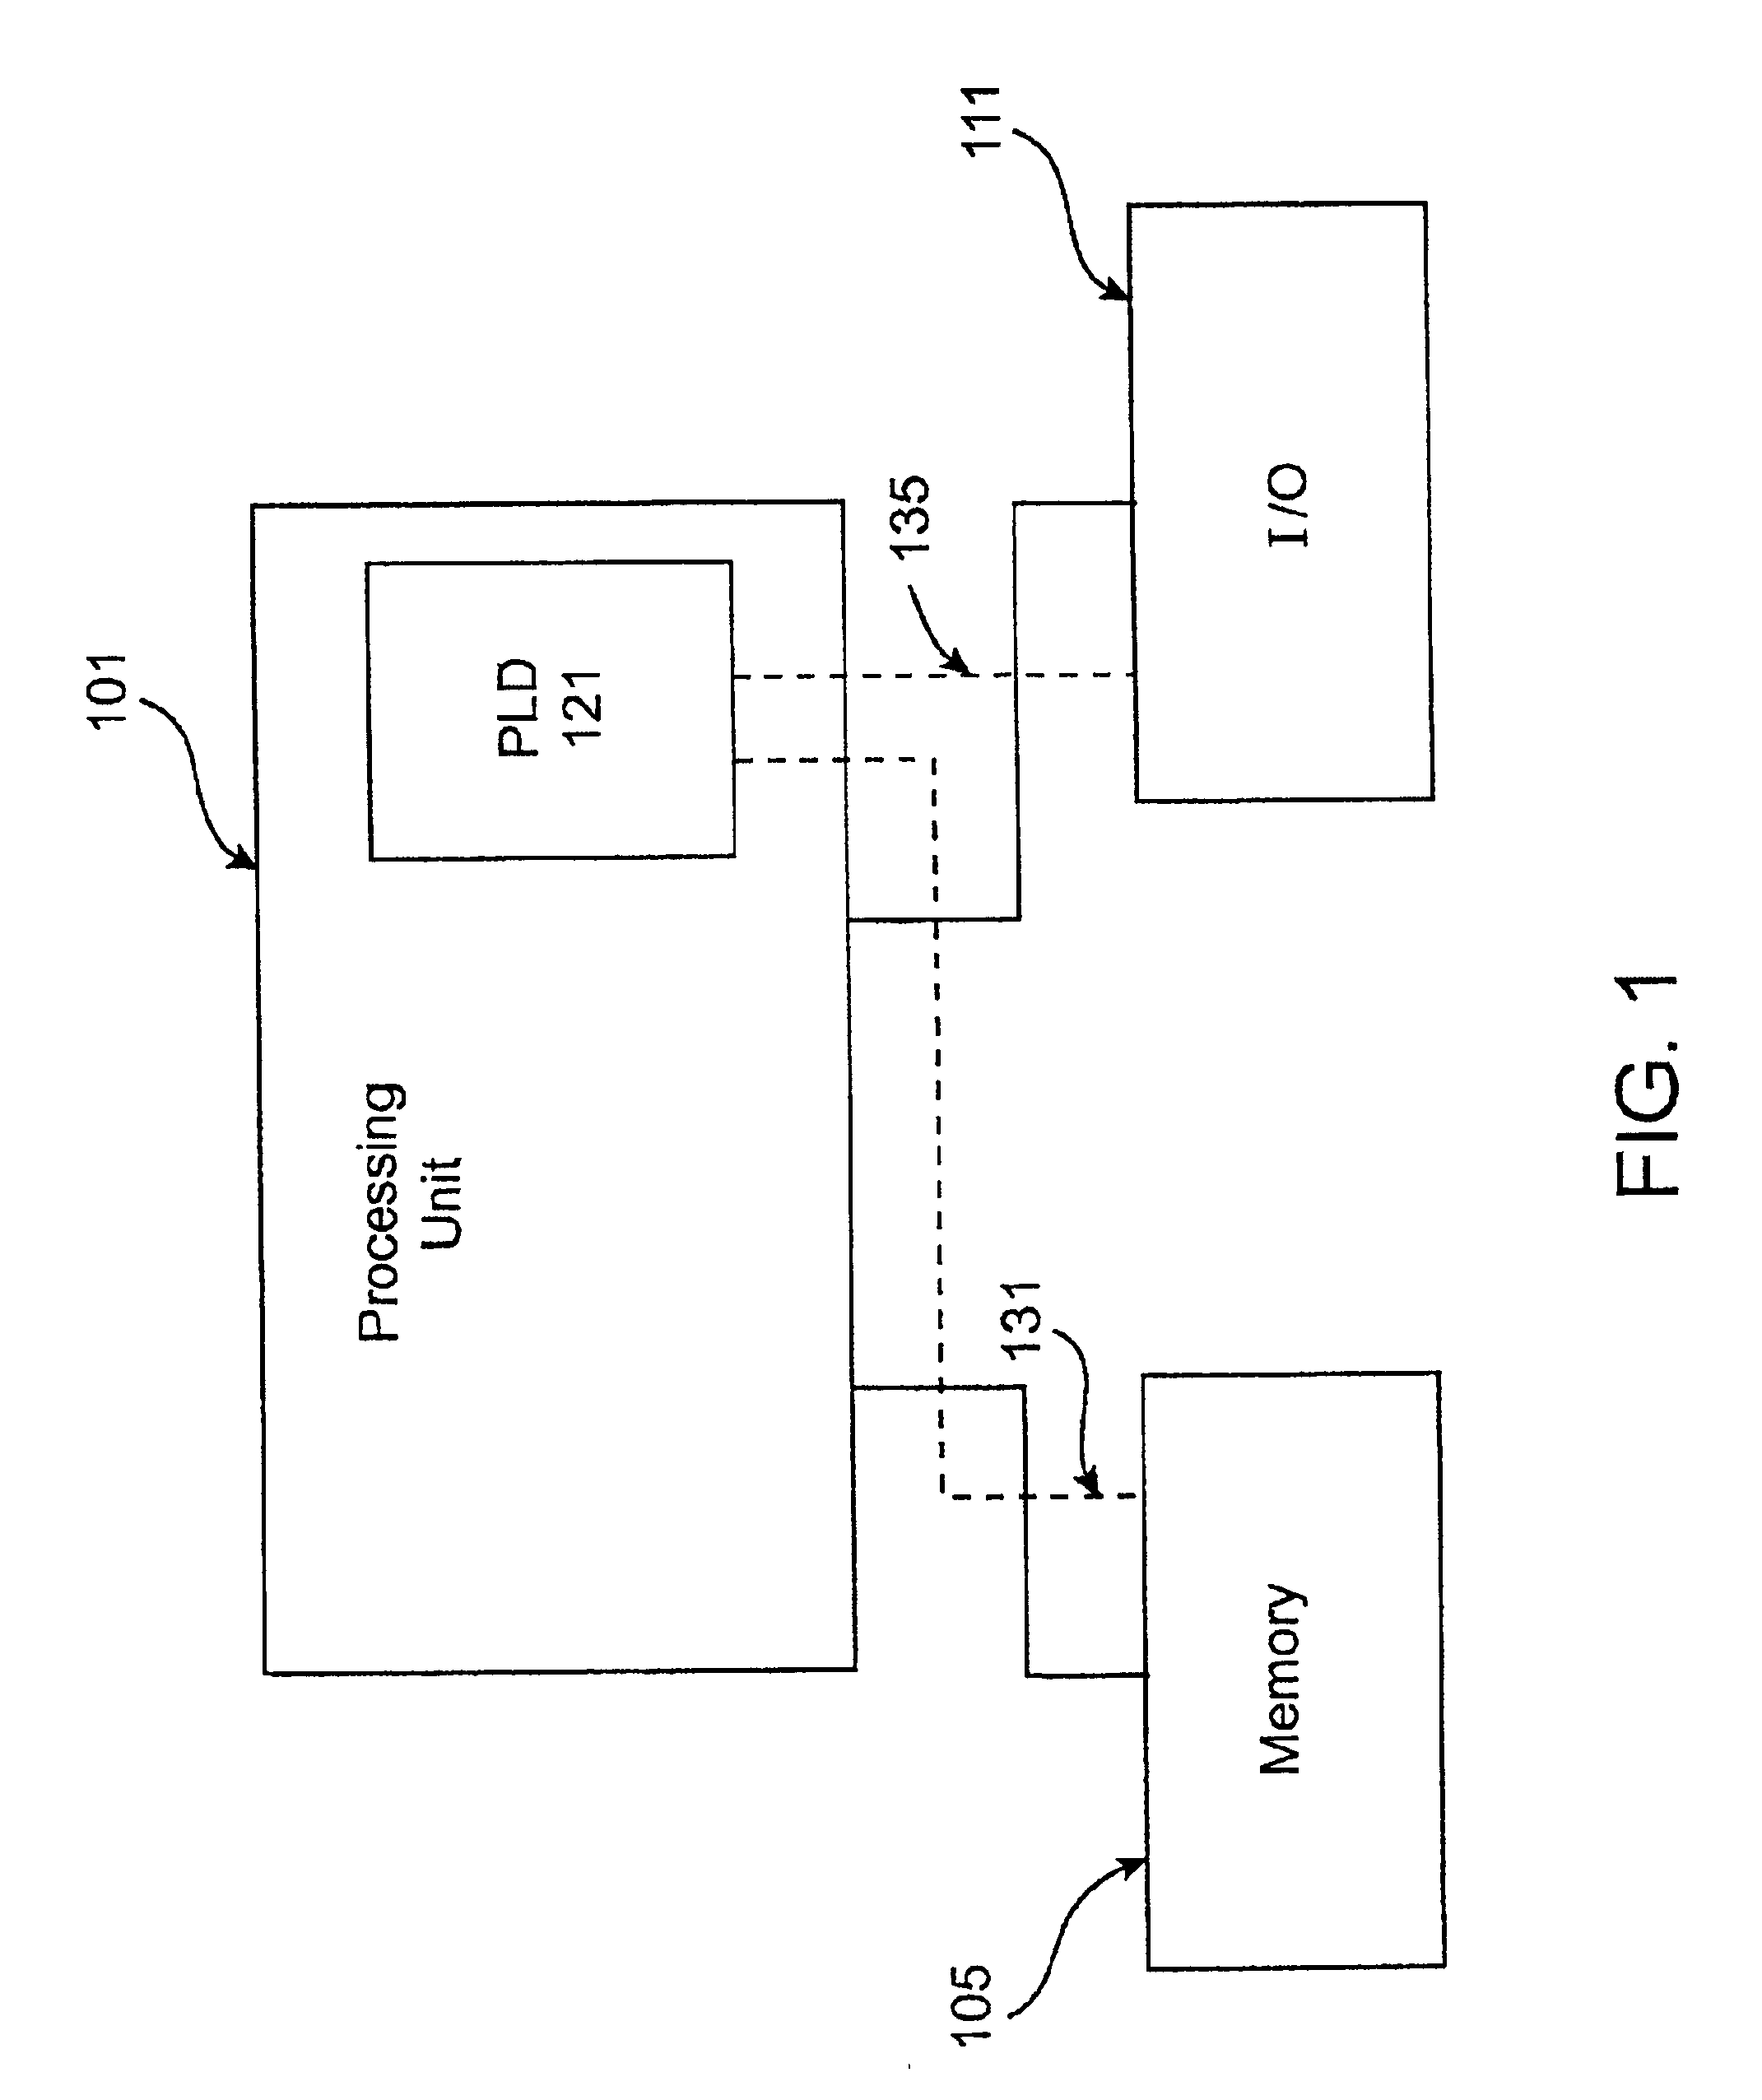 Tristate structures for programmable logic devices